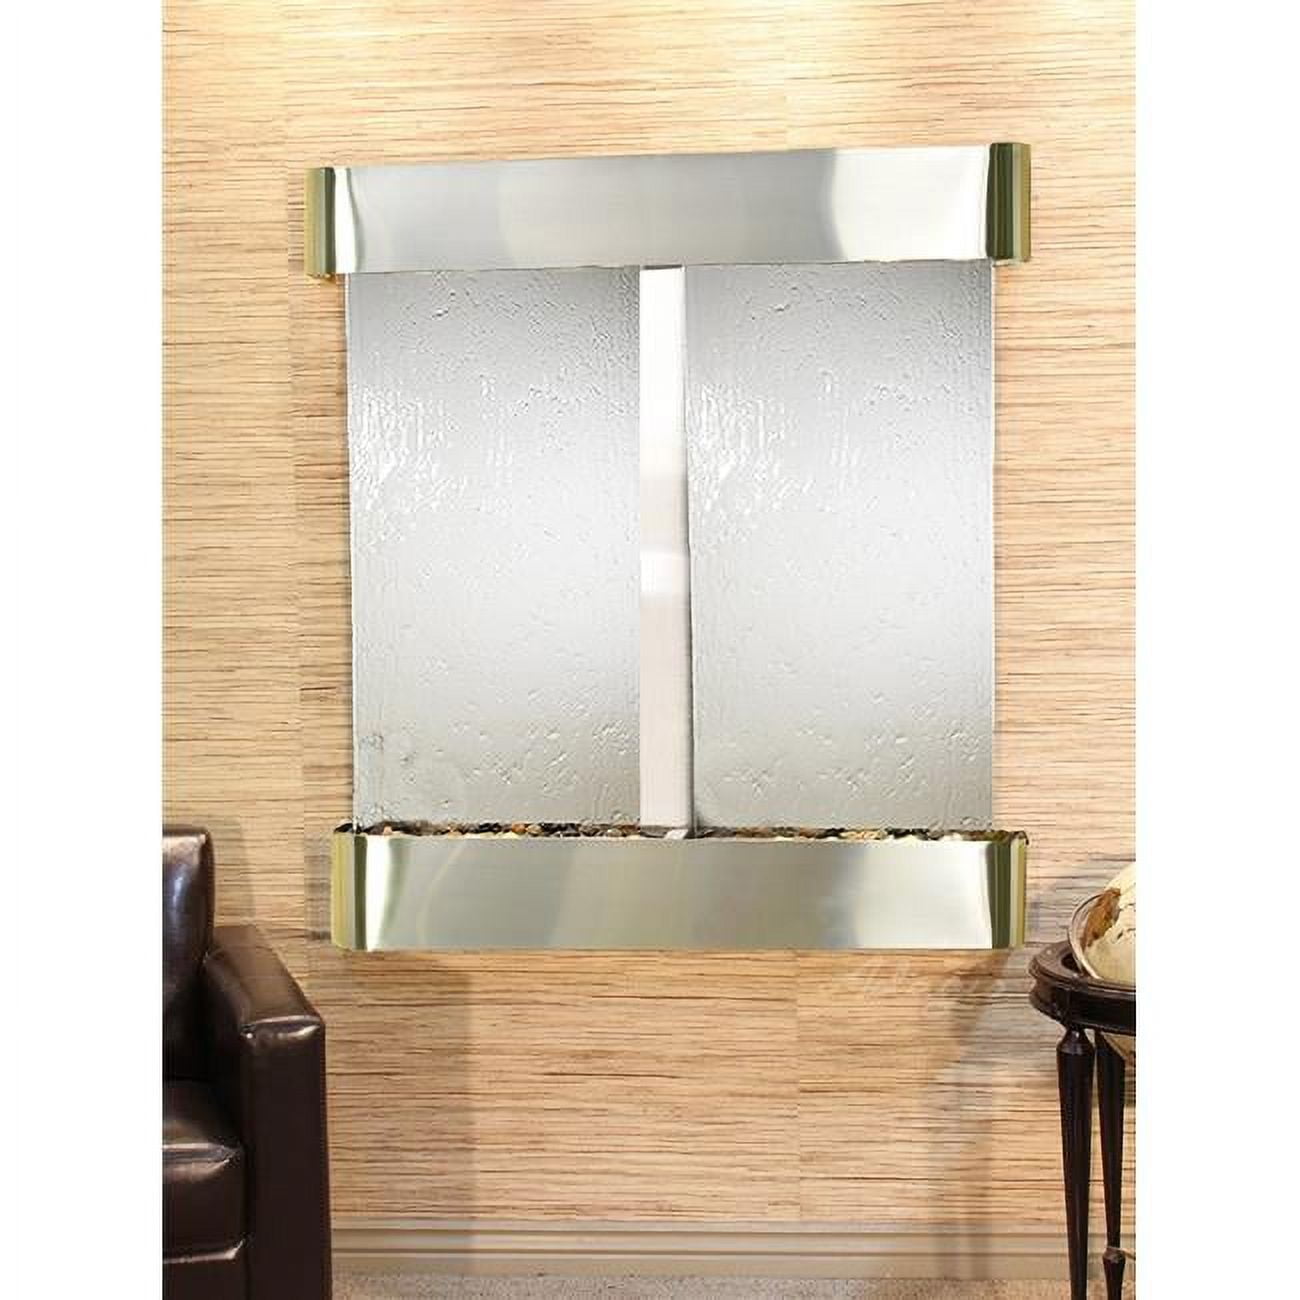 Picture of Adagio AFR2040 Aspen Falls Round Wall Fountain - Stainless Steel-Silver Mirror